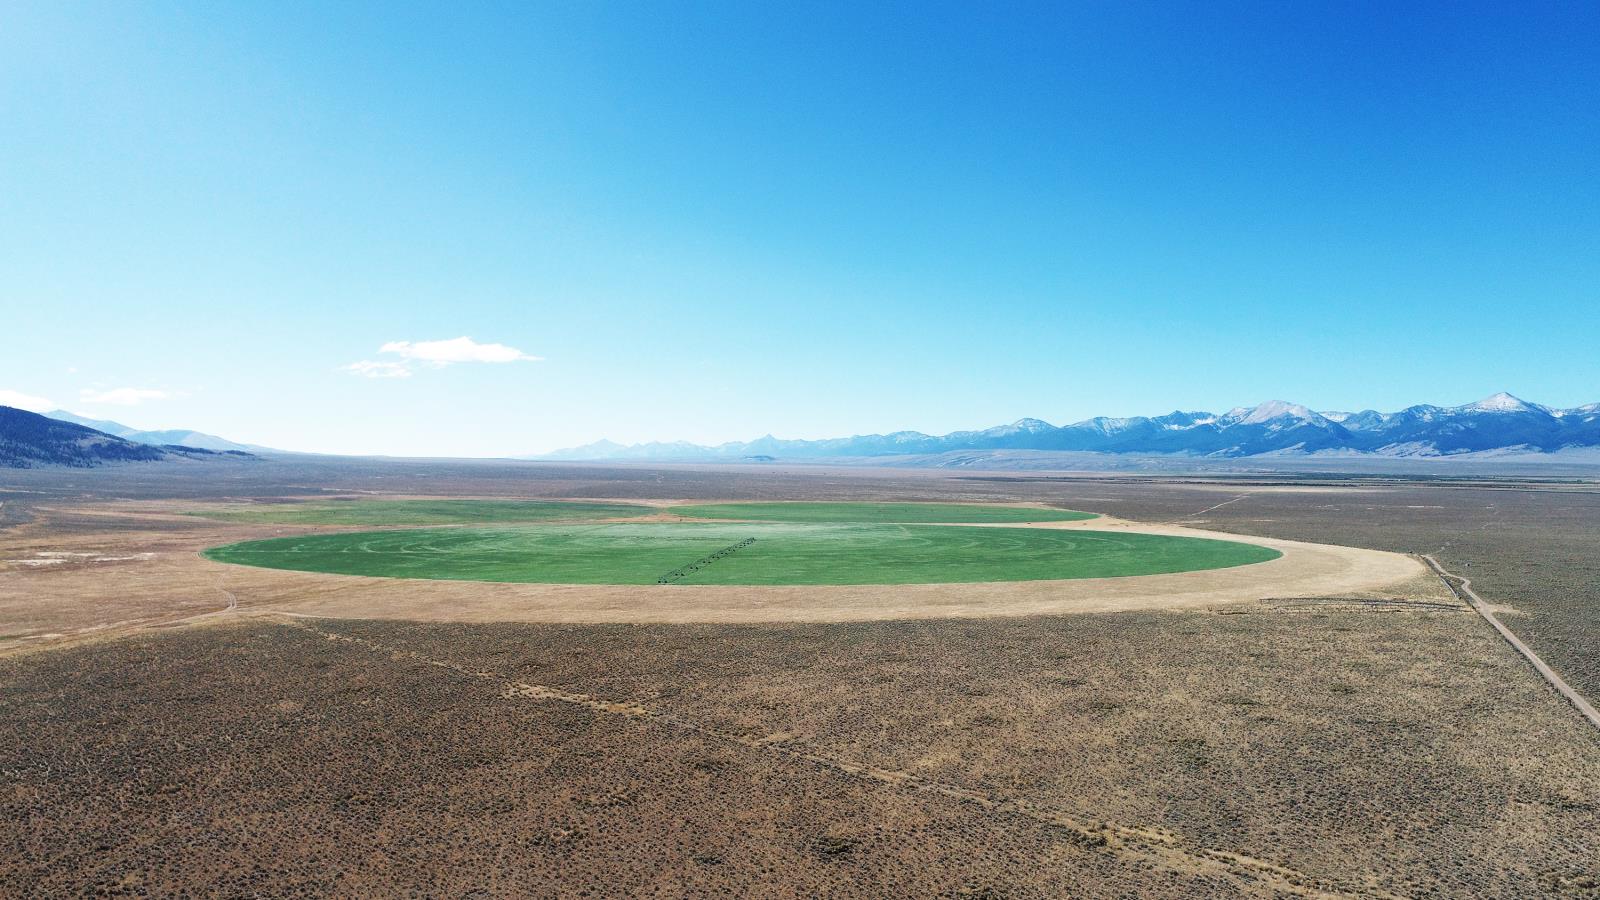 The reservoirs and Snake River in southern Idaho have allowed farmers to produce an abundance of agricultural commodities in a desert environment. That requires a lot of water and according to U.S. Geological Survey data, Idaho ranks No. 2 in the nation in total water withdrawals for irrigation. In this photo in central Idaho, an irrigated plot of farmland is surrounded by non-irrigated ground. 